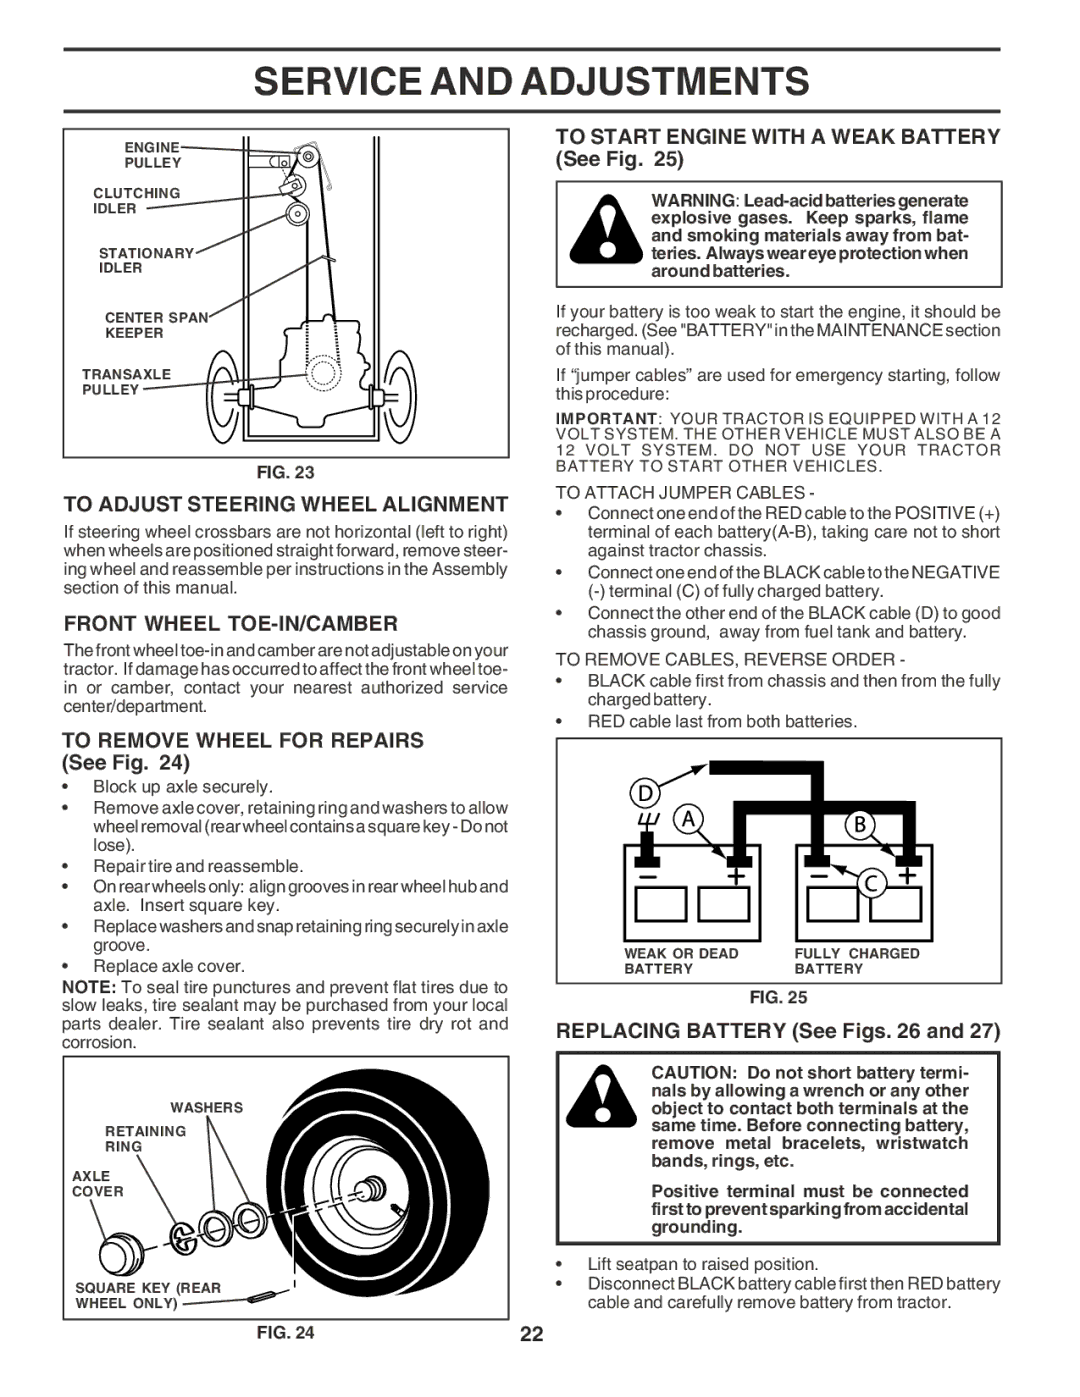 Poulan PO16542B manual To Adjust Steering Wheel Alignment, Front Wheel TOE-IN/CAMBER, Replacing Battery See Figs 